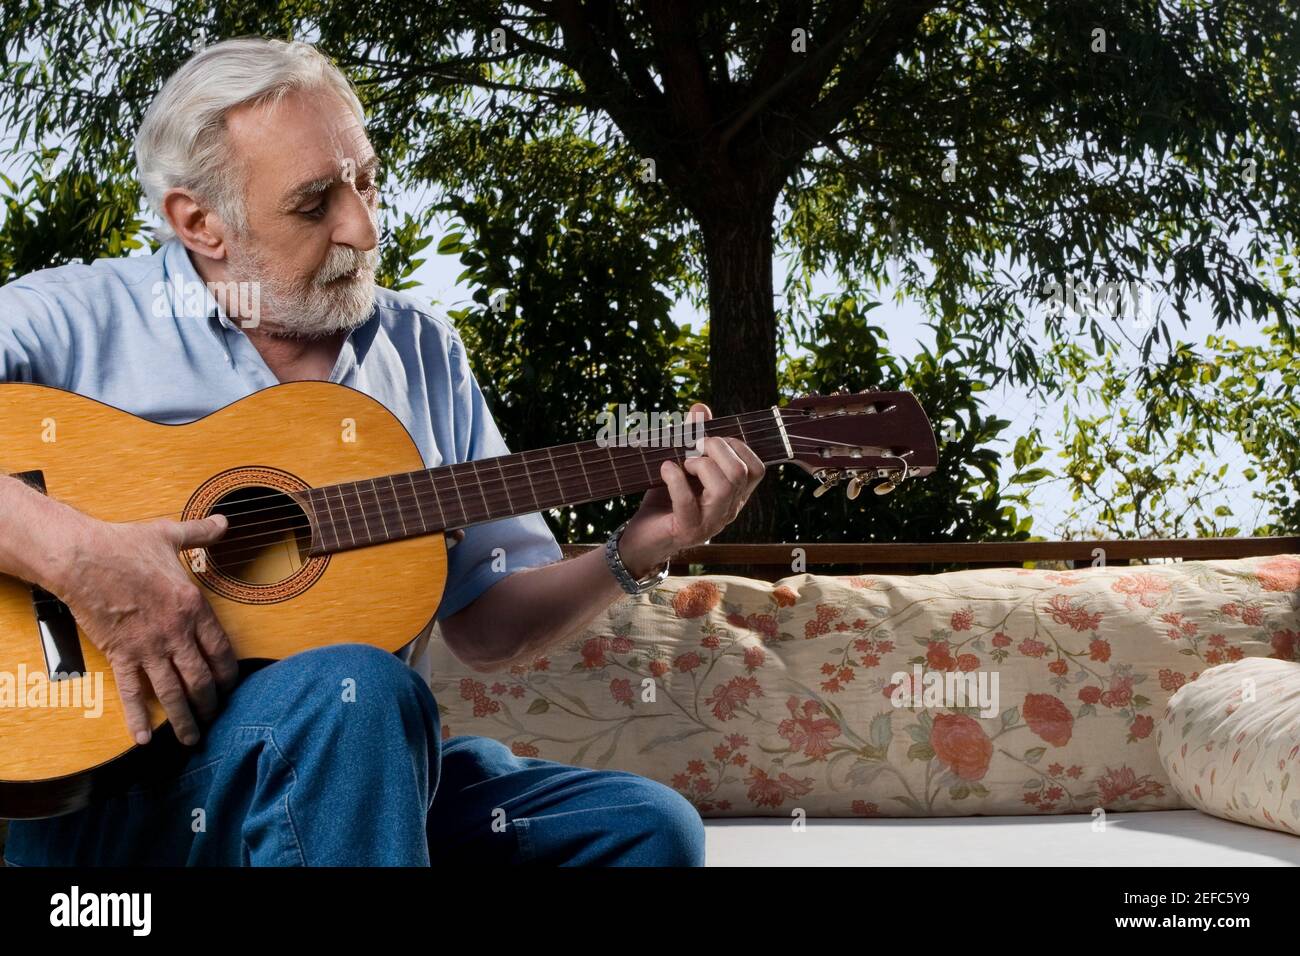 Senior man sitting on a couch and playing a guitar Stock Photo